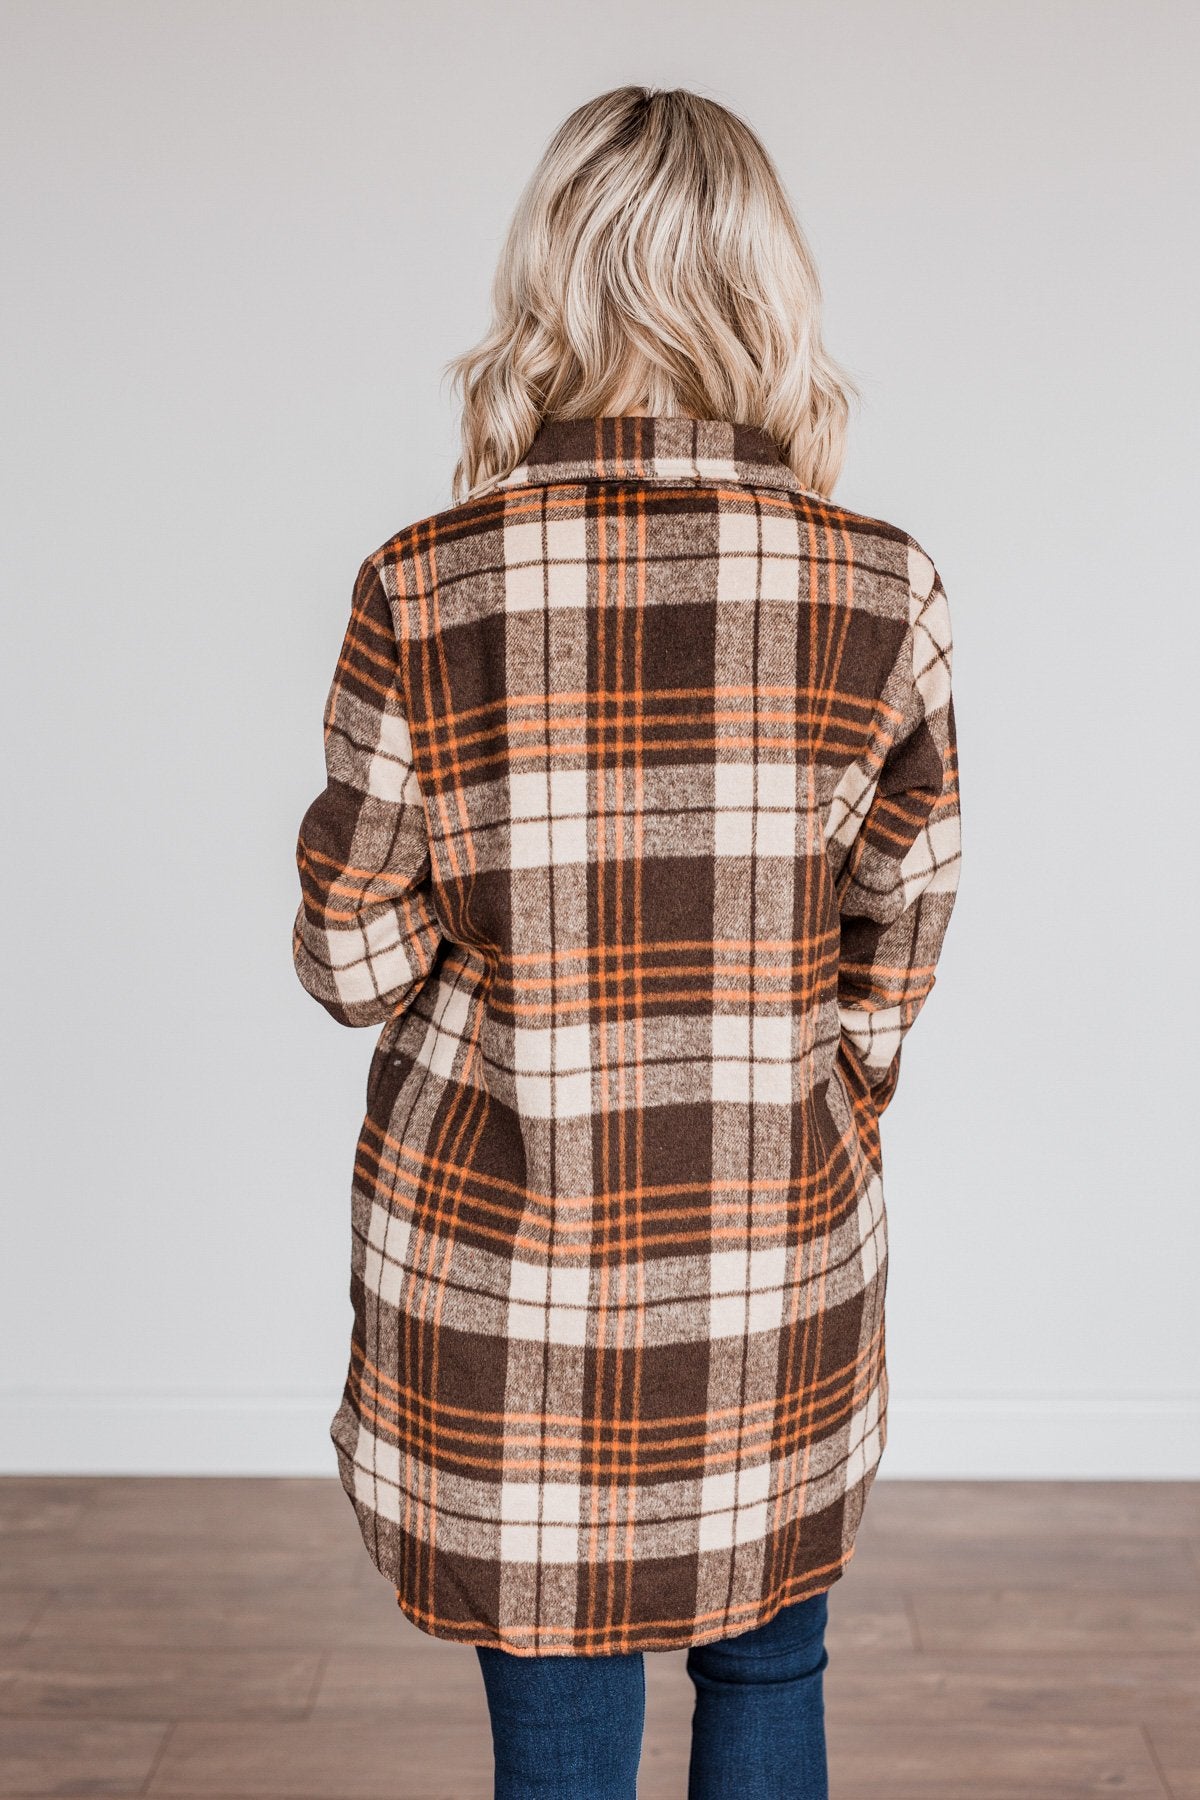 Time With You Plaid Top- Orange & Chocolate